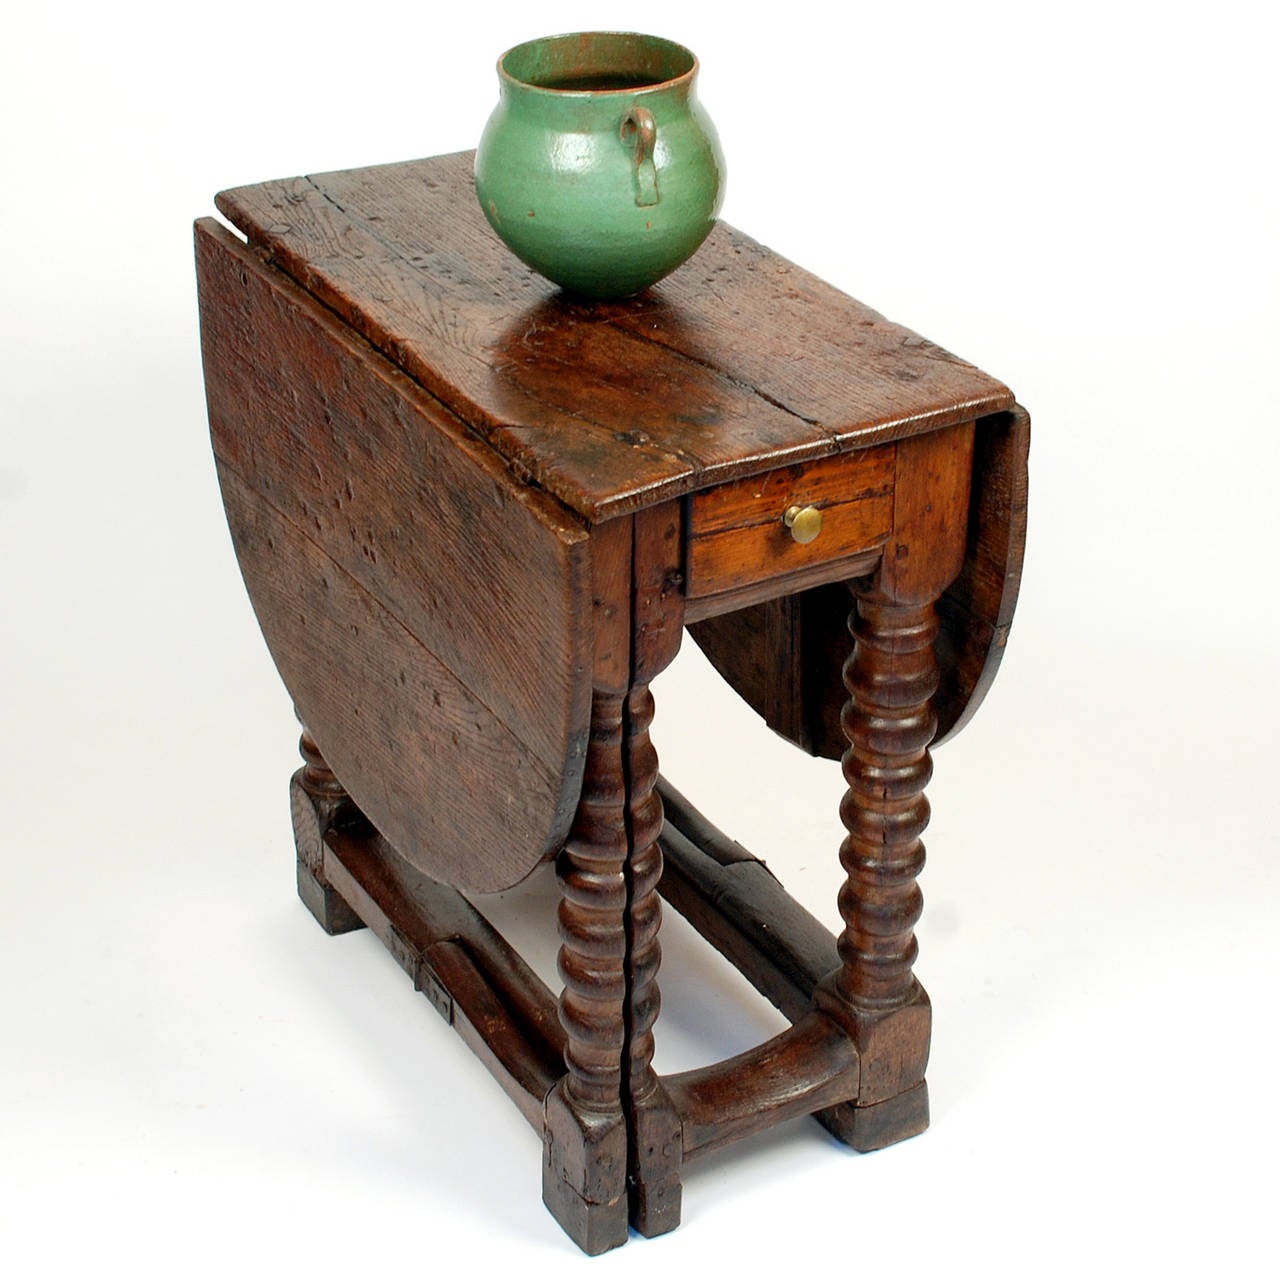 This early 18th century gate-leg table, made entirely of 'sweet' chestnut from Spain's Basque Country, was fashioned after the nearly ubiquitous English made model. This Spanish edition however, is anything but ubiquitous. To the contrary, this